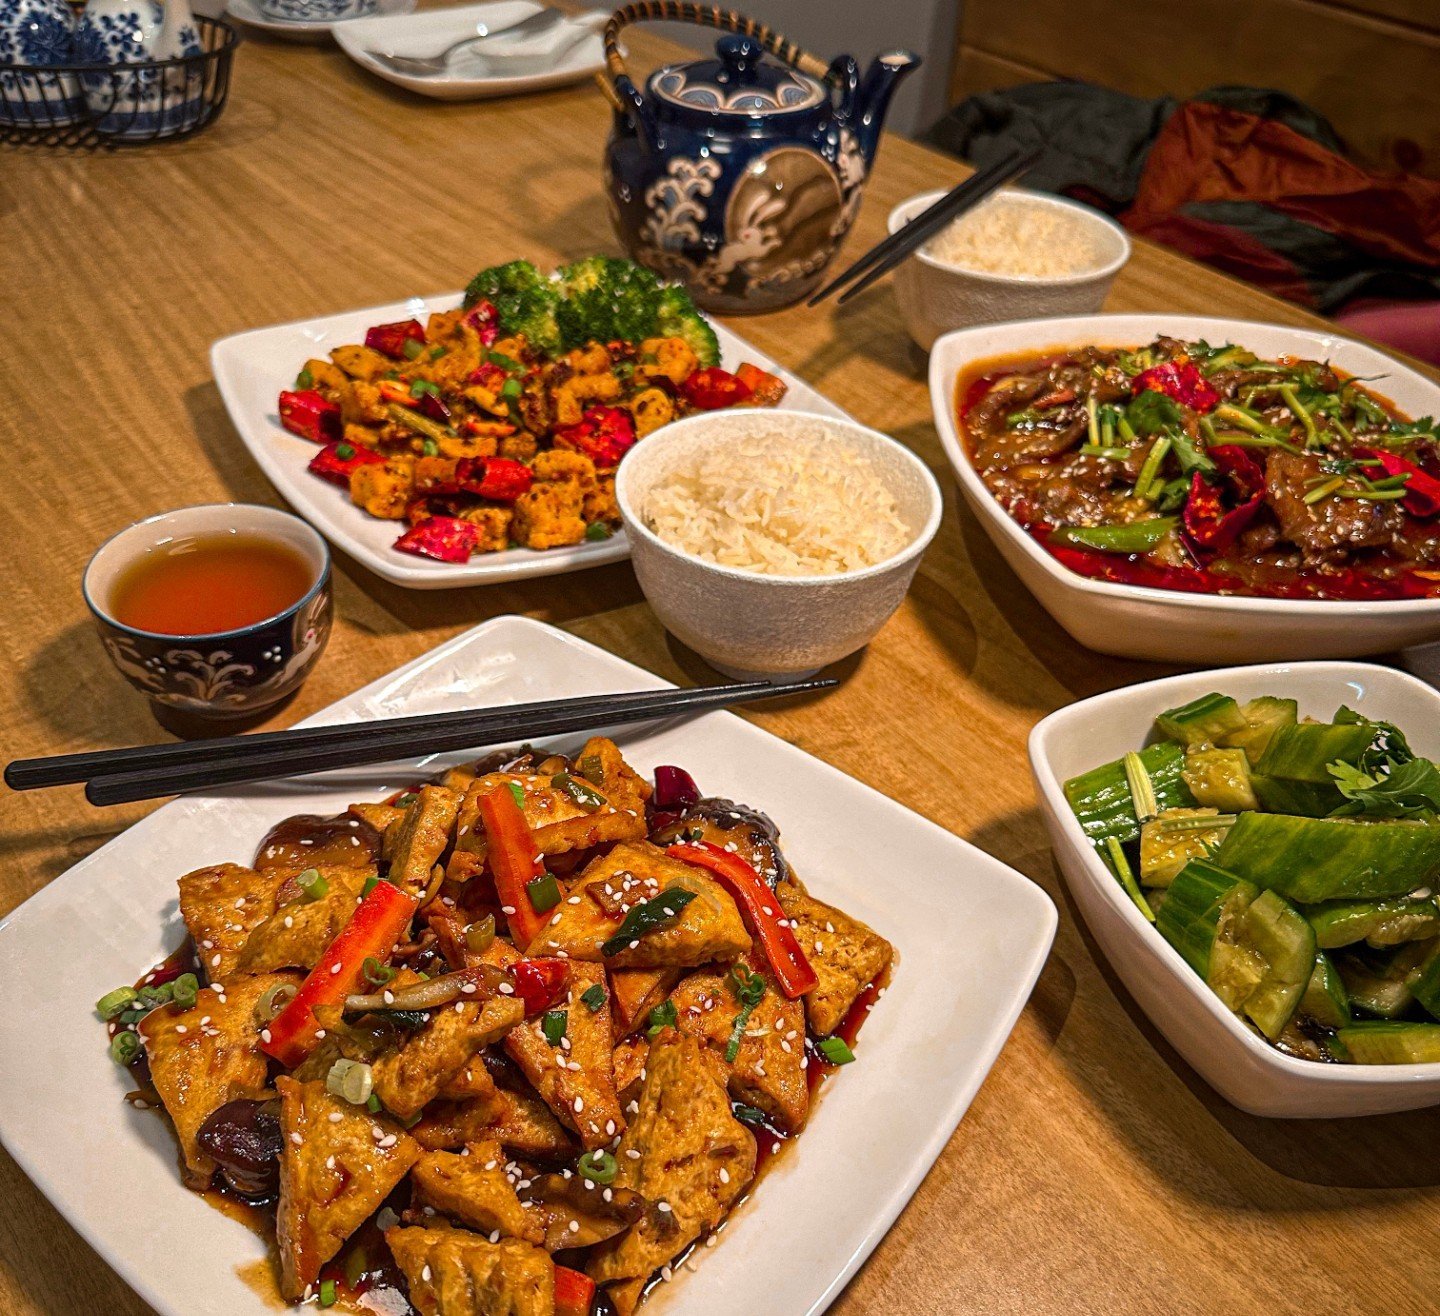 Experience the perfect blend of bold spices, fresh ingredients, and centuries-old techniques. Welcome to a true taste of China! Explore our menu and order online for pickup or delivery. Link in bio! #PapaNoodles #tasteofasia #njrestaurant #SavorTheMo